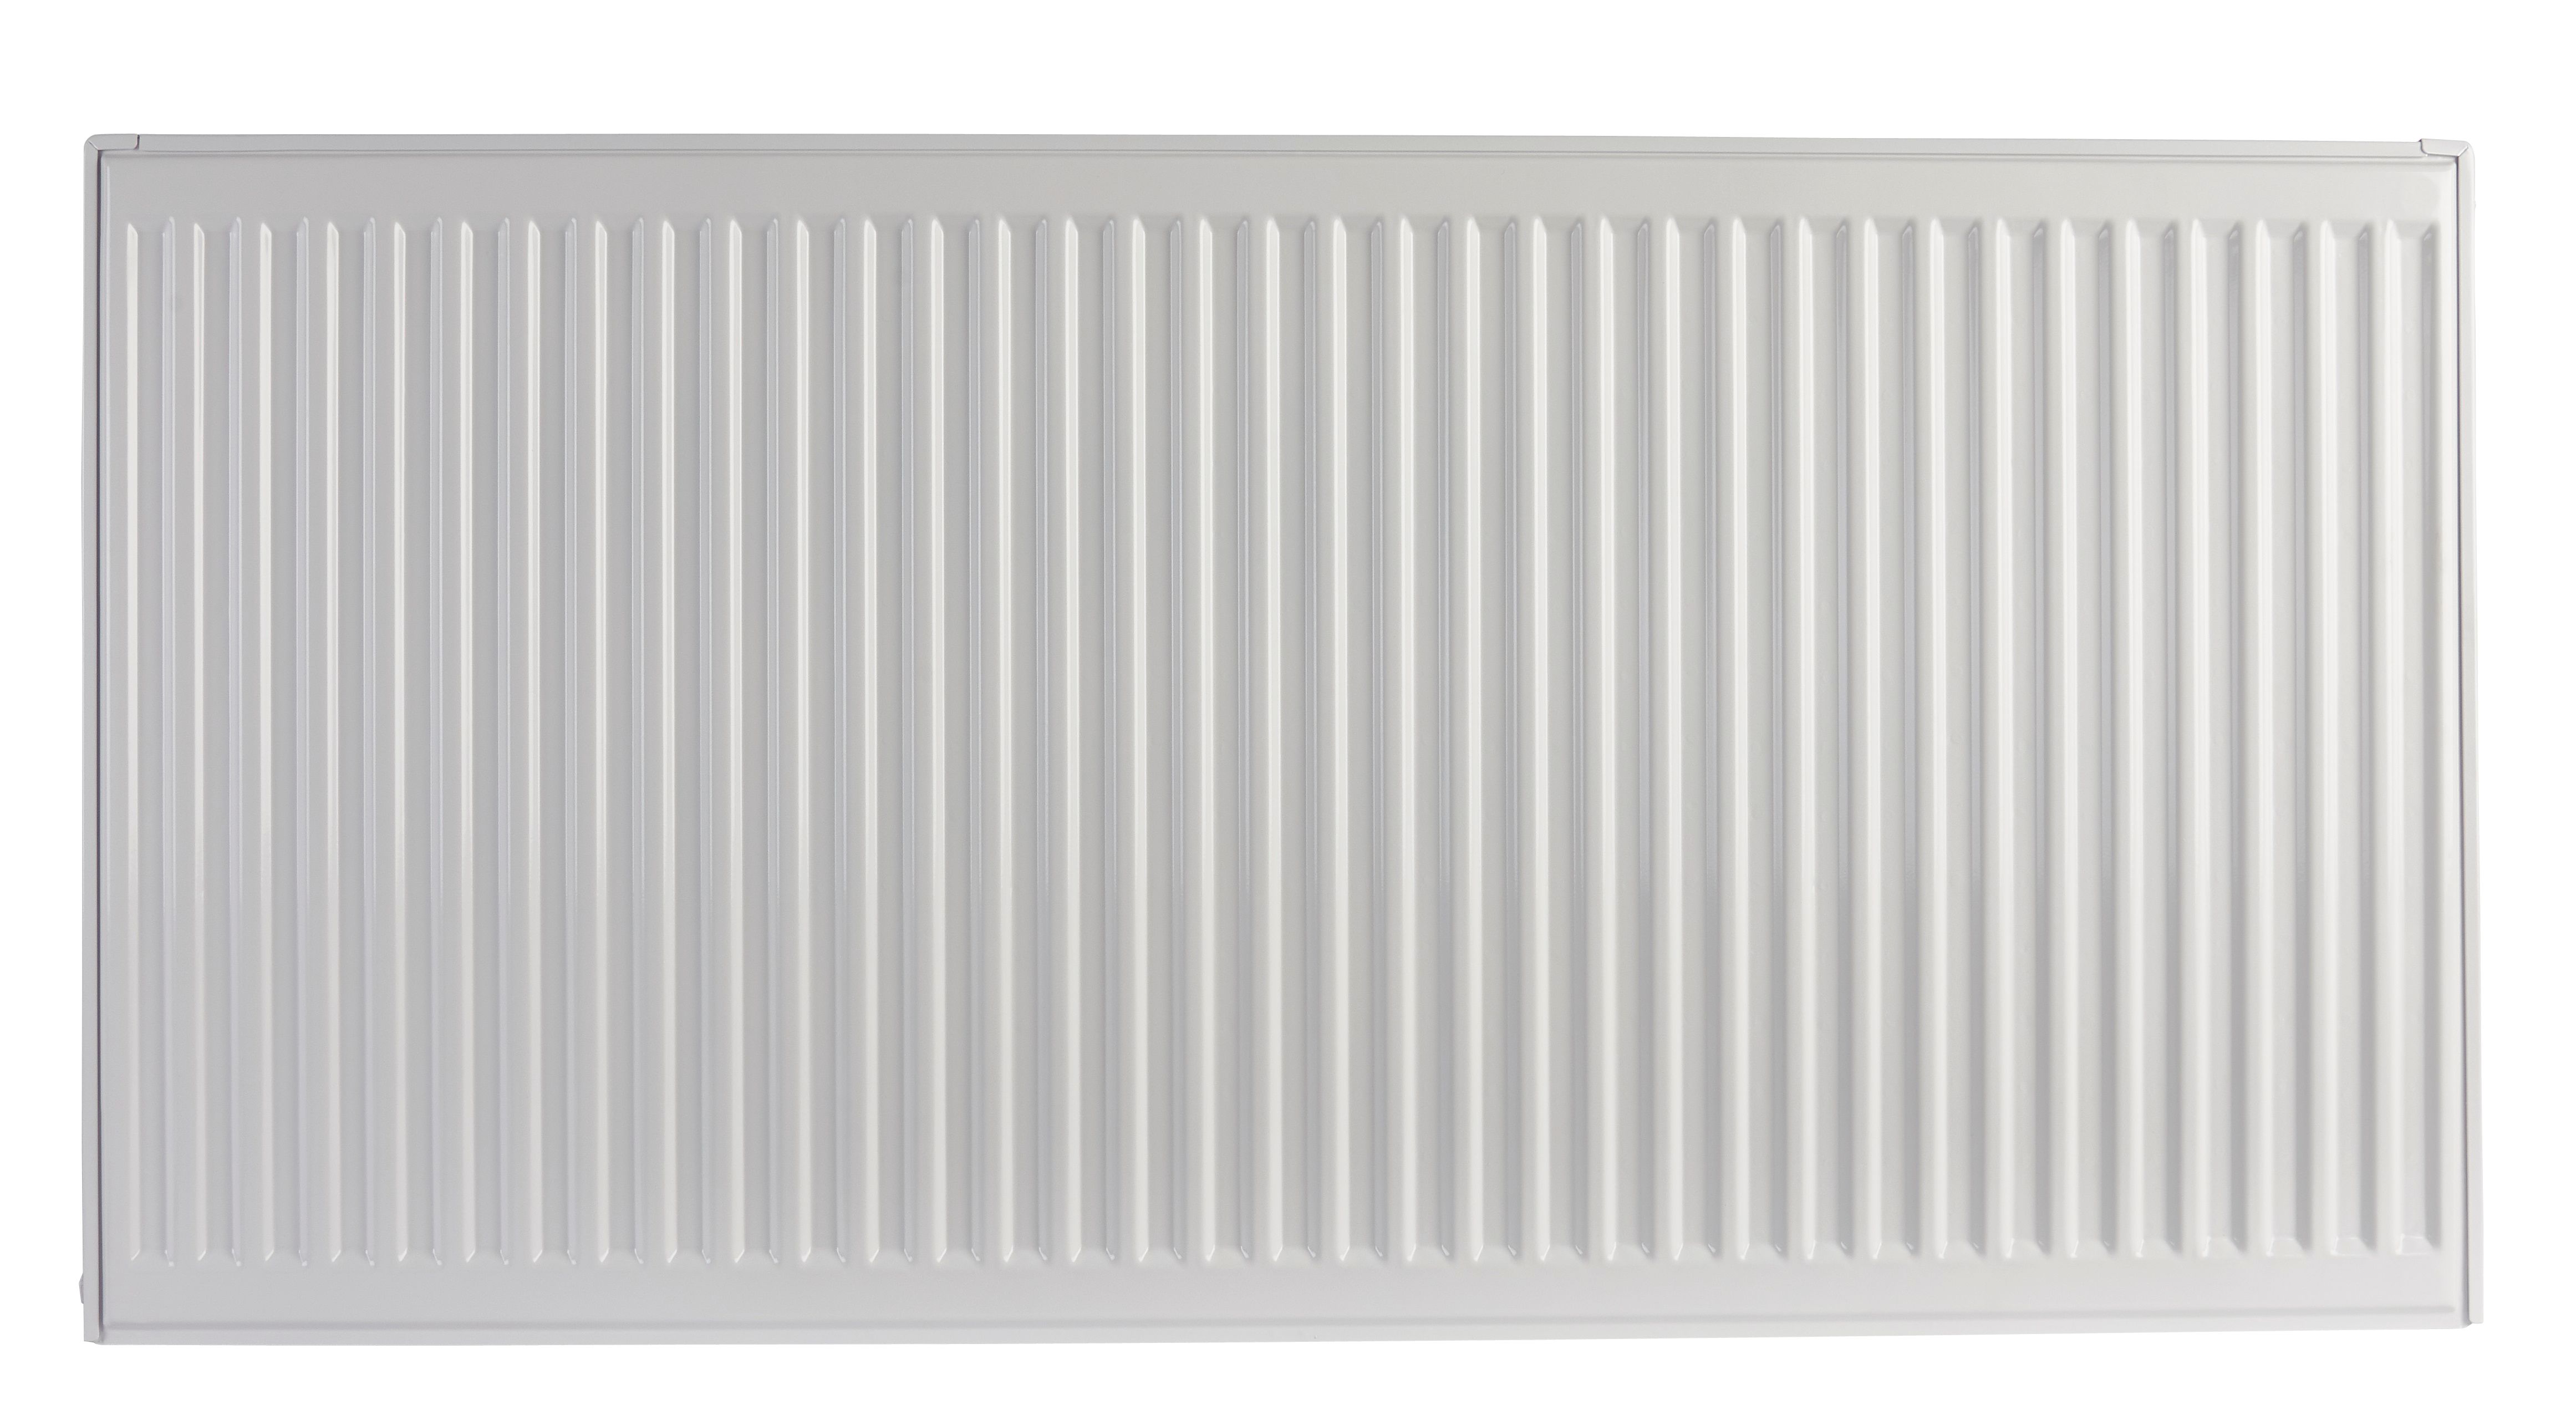 Image of Homeline by Stelrad 600 x 800mm Type 22 Double Panel Premium Double Convector Radiator